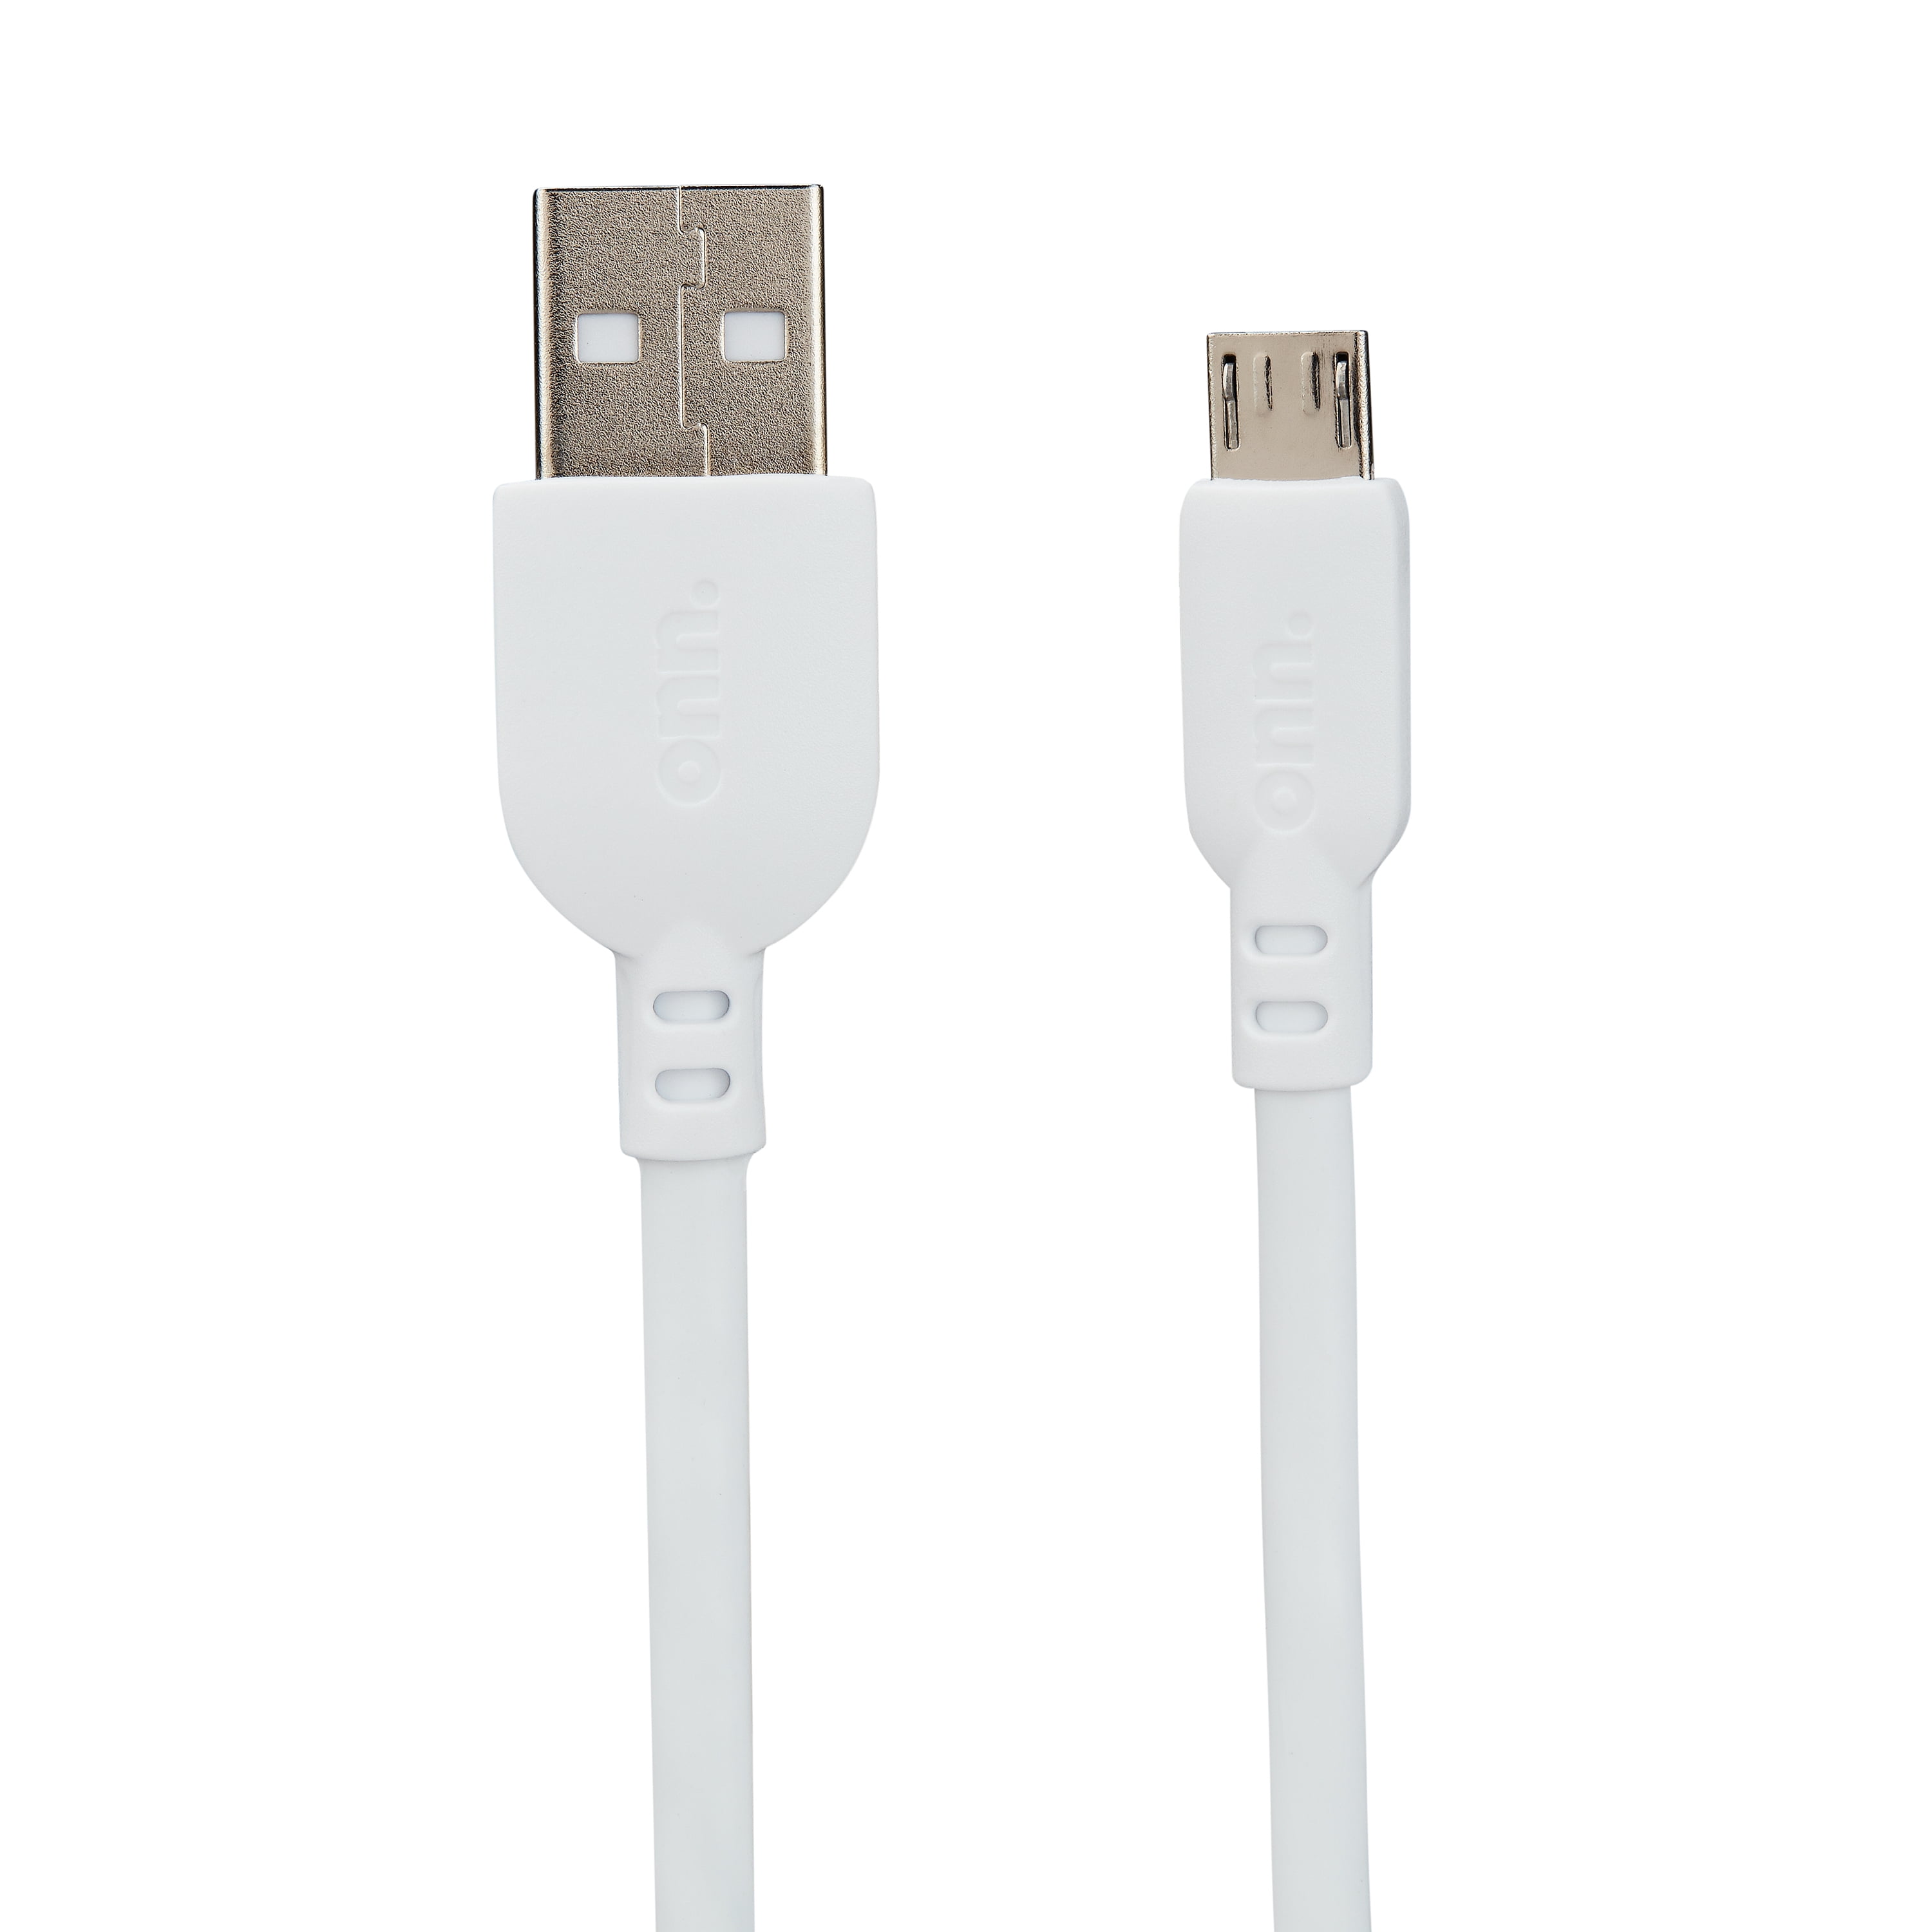 onn. Micro-USB to USB Cable, 10 ft, White -